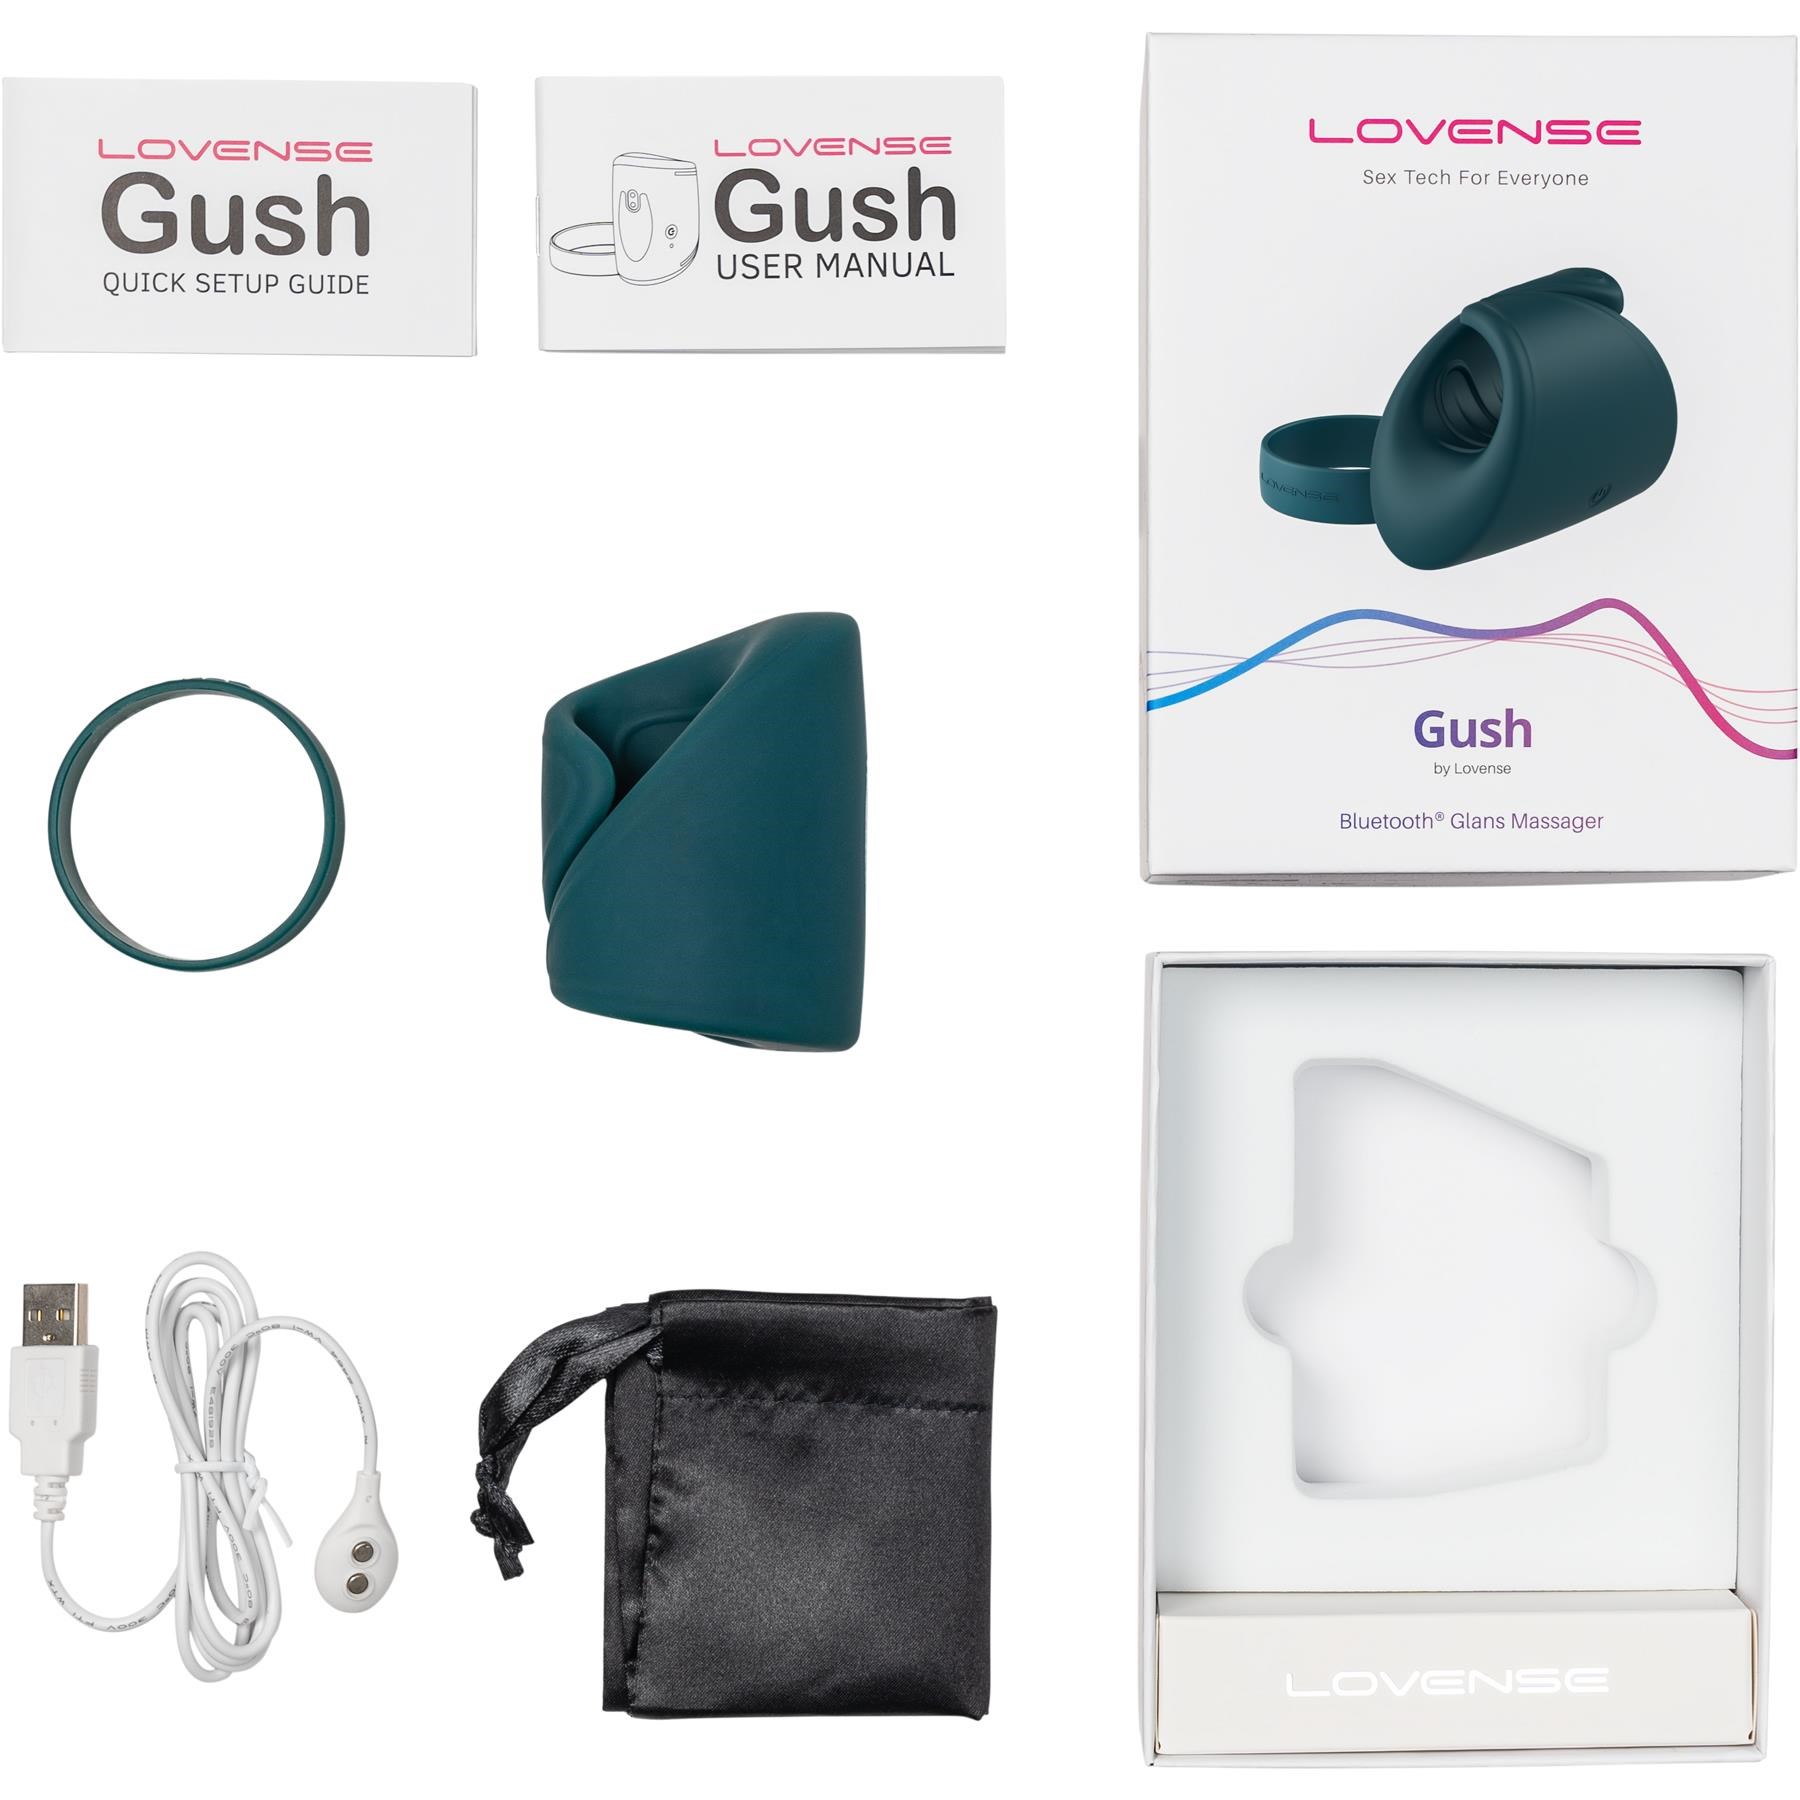 Lovense Gush Bluetooth Glans Massager - All Components